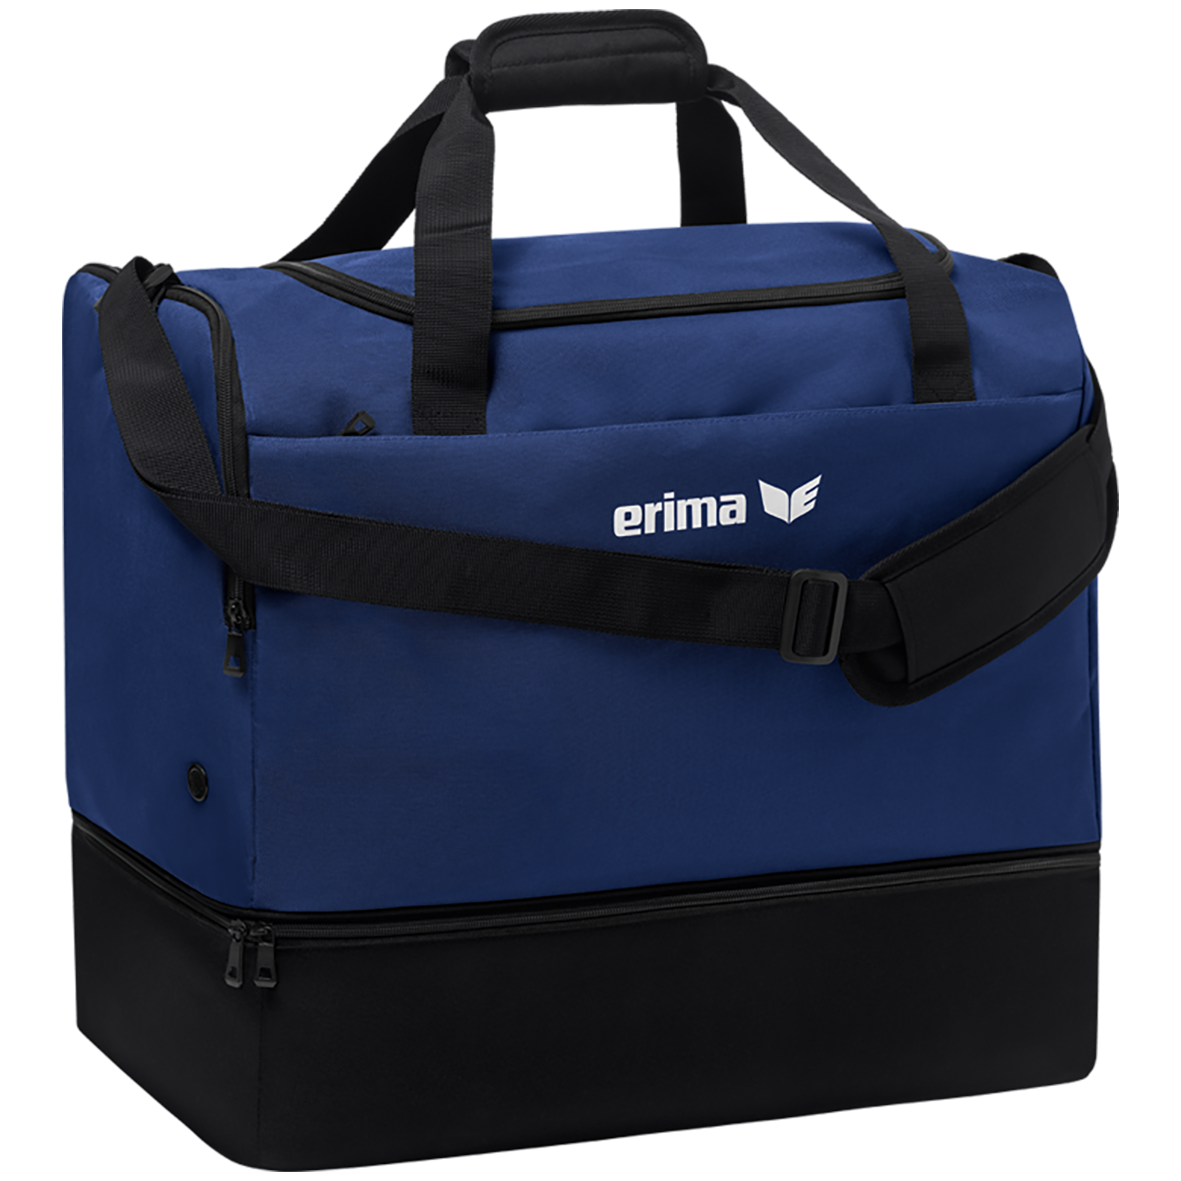 ERIMA TEAM SPORTS BAG WITH BOTTOM COMPARTMENT, NEW NAVY.